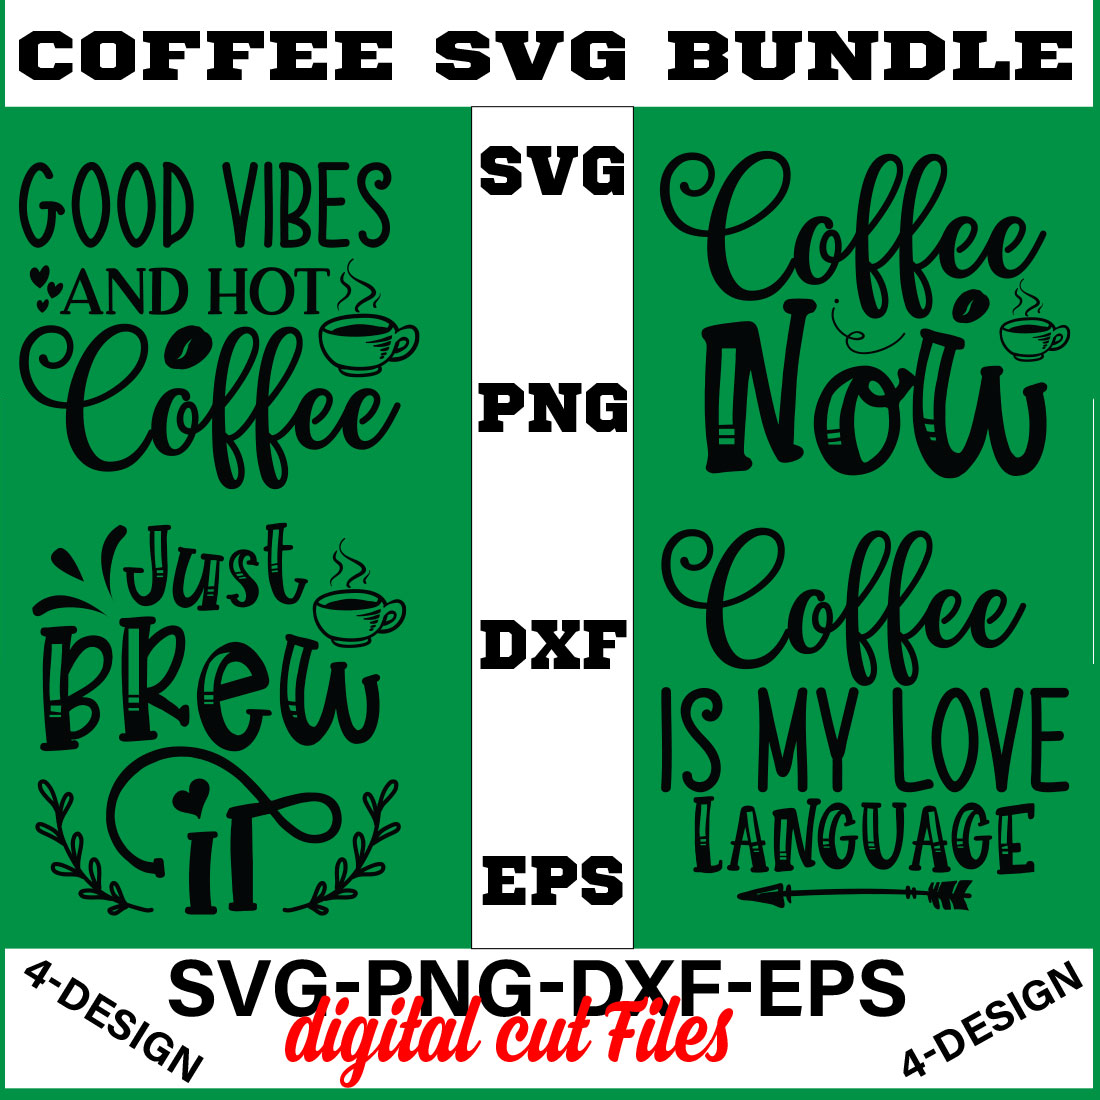 Coffee SVG Bundle, Funny Coffee SVG, Coffee Quote Svg, Caffeine Queen, Coffee Lovers, Coffee Obsessed Volume-13 cover image.